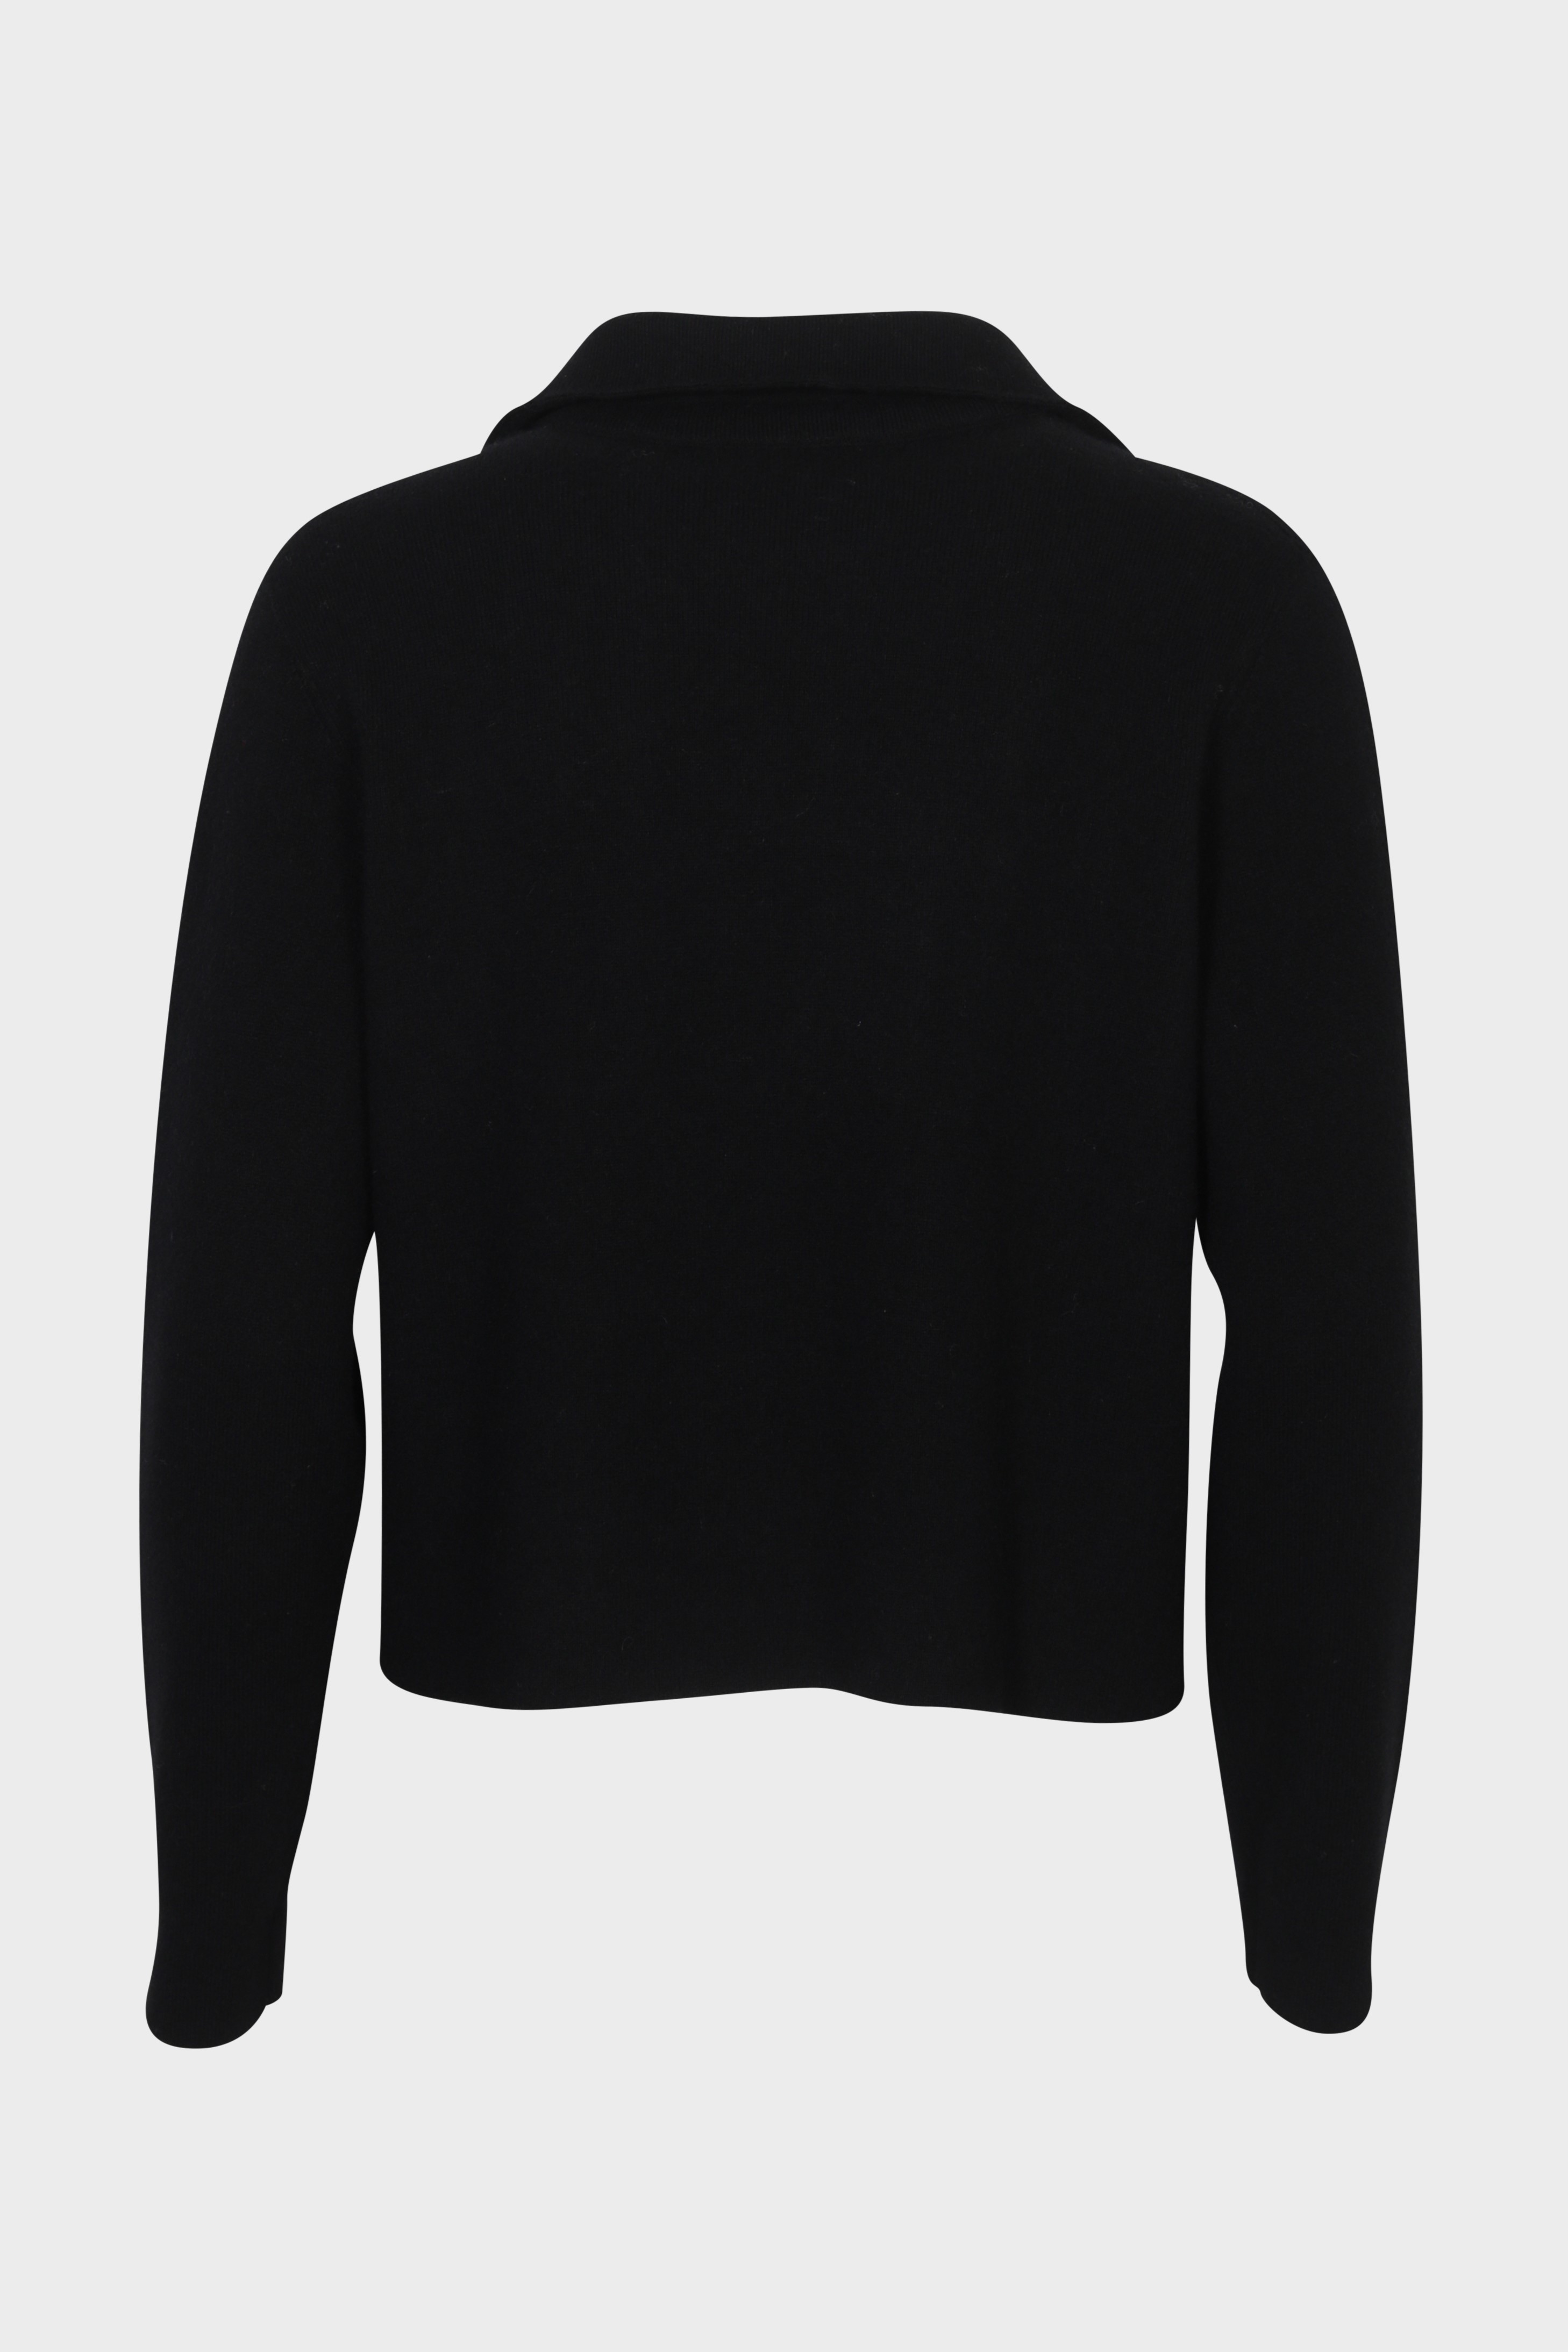 SMINFINITY Chilly Cropped Knit Jacket in Black L